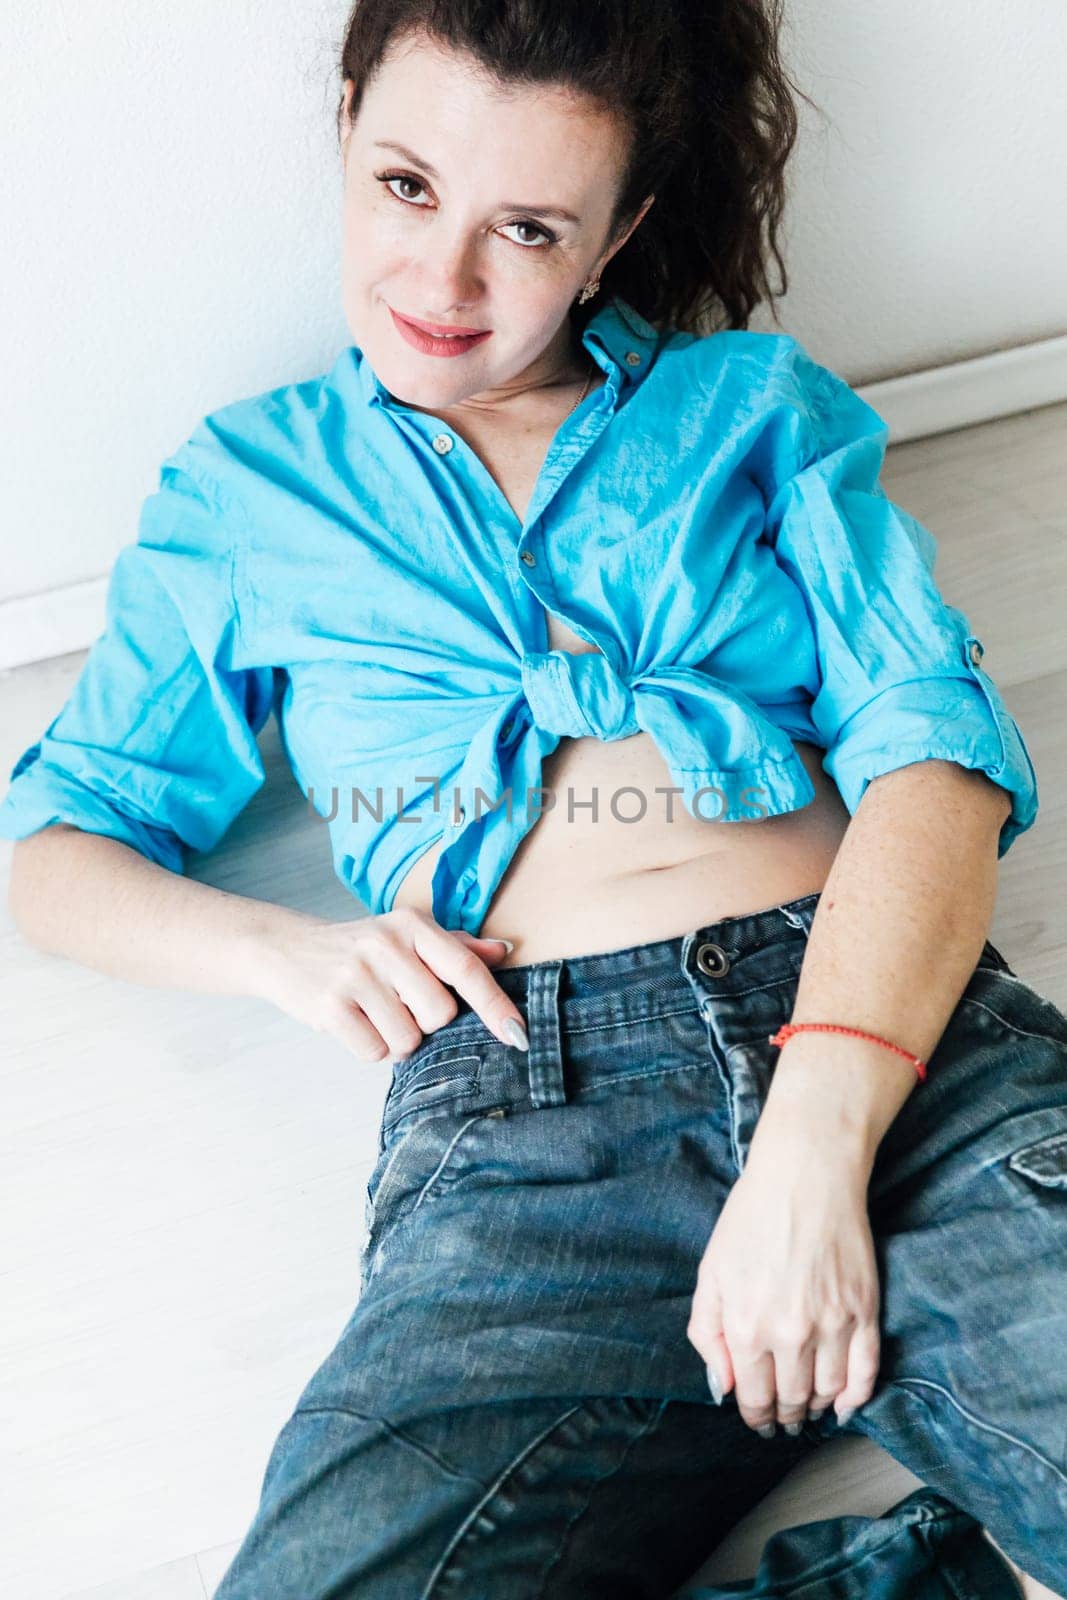 woman in a blue shirt lies on the floor in a bright room